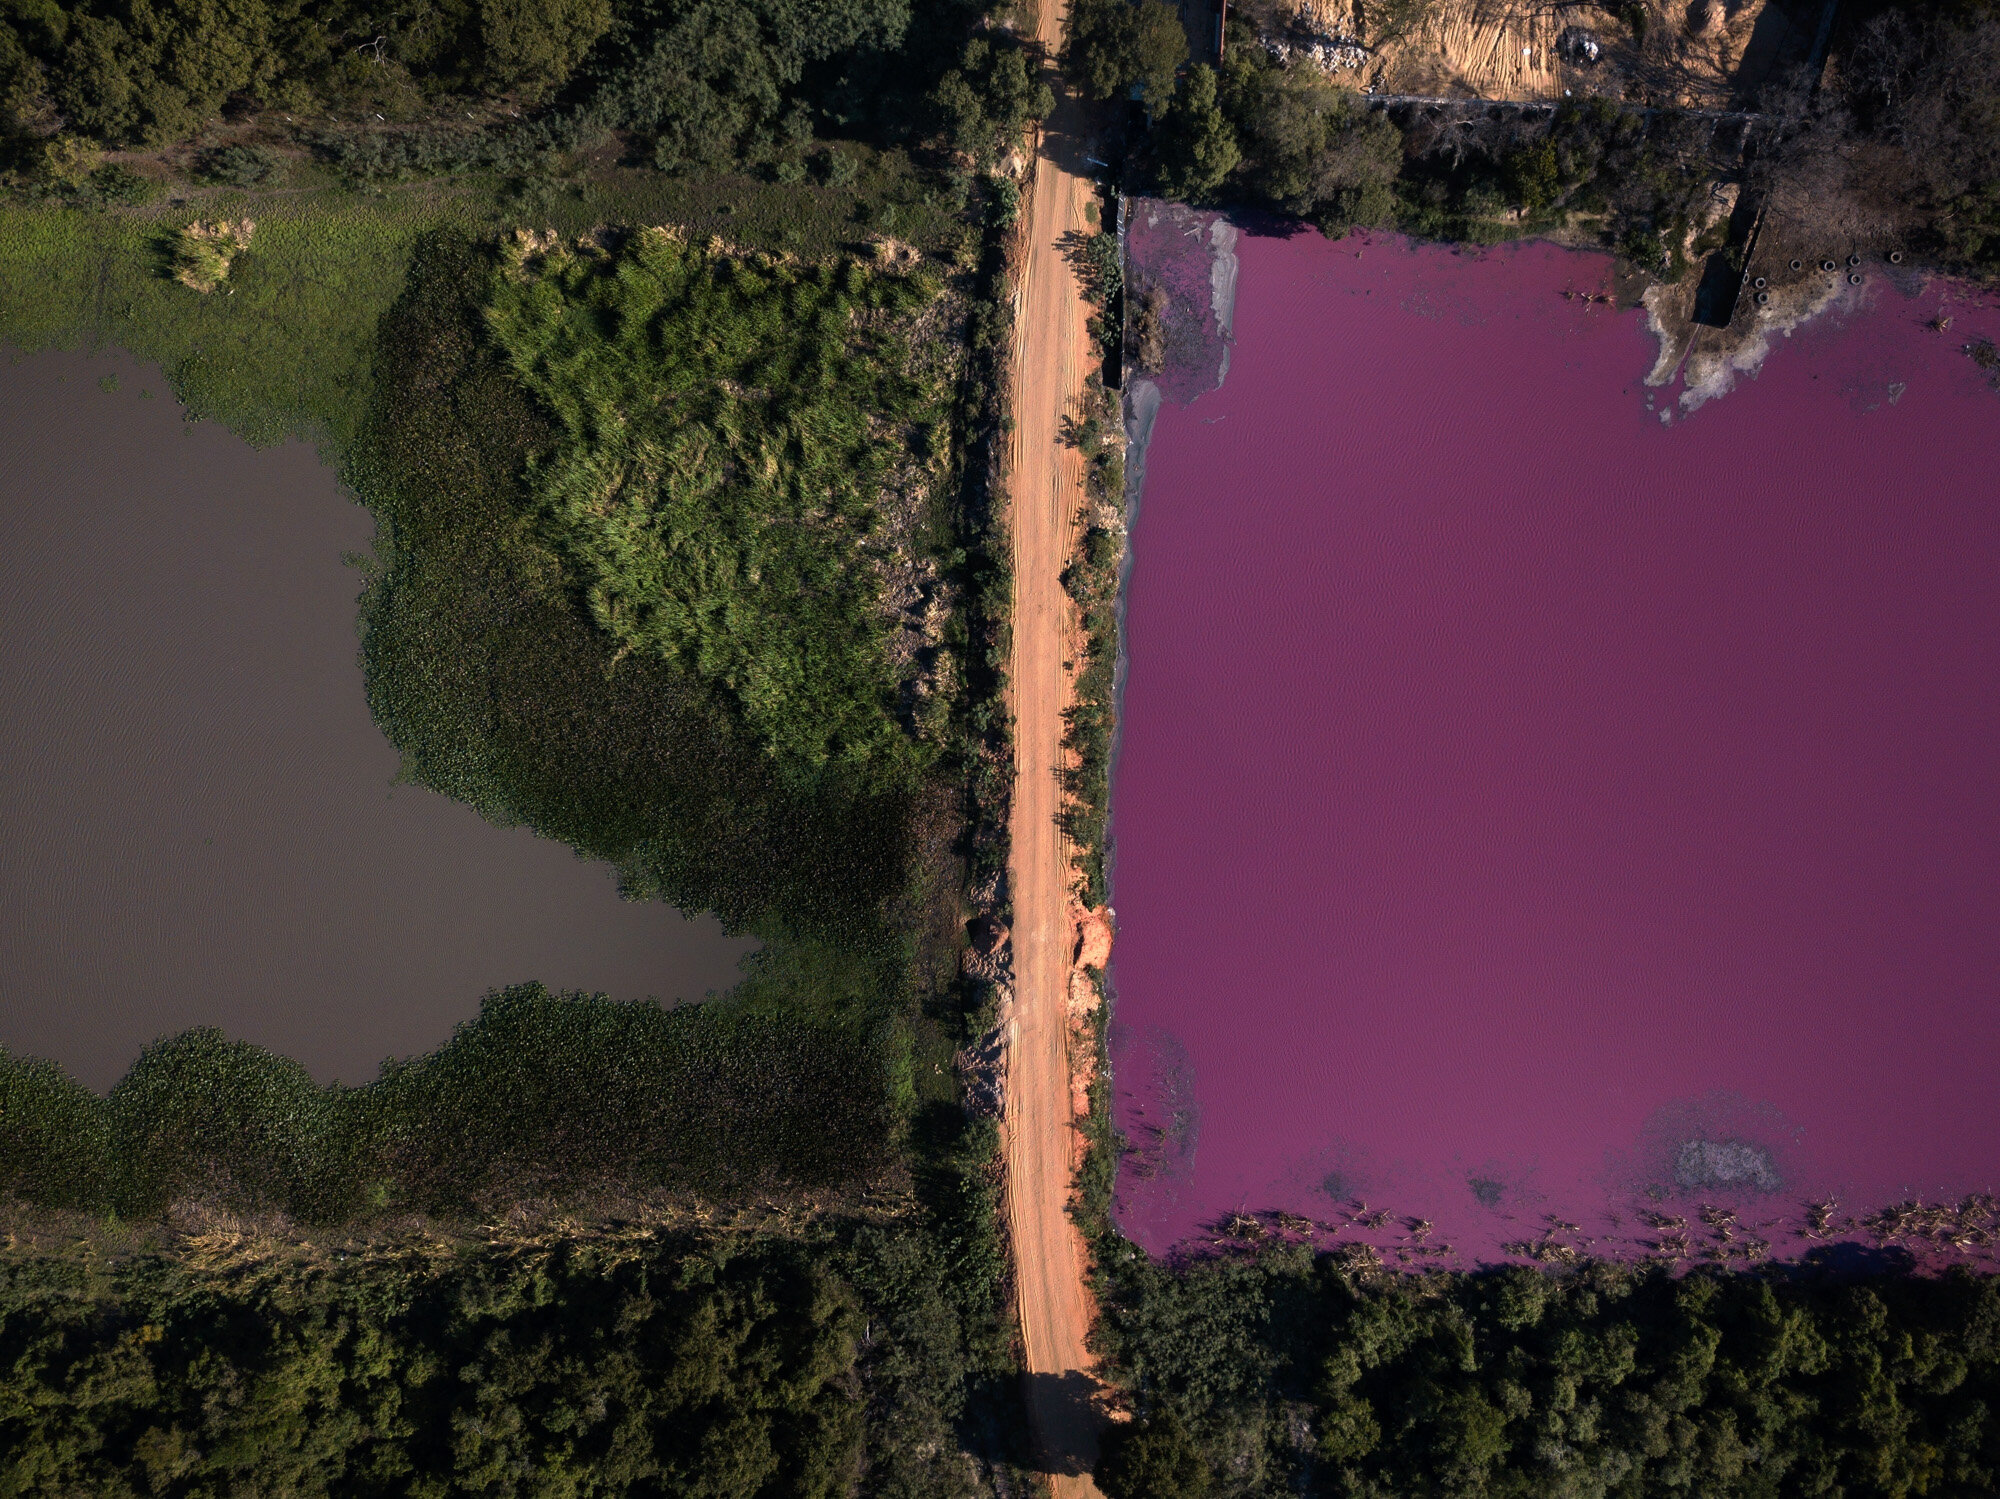  A road divides the Cerro Lagoon, where the water at right is colored and the Waltrading S.A. tannery stands on the bank, top right, in Limpio, Paraguay, on Aug. 5, 2020. According to Francisco Ferreira, a technician at the National University Multid